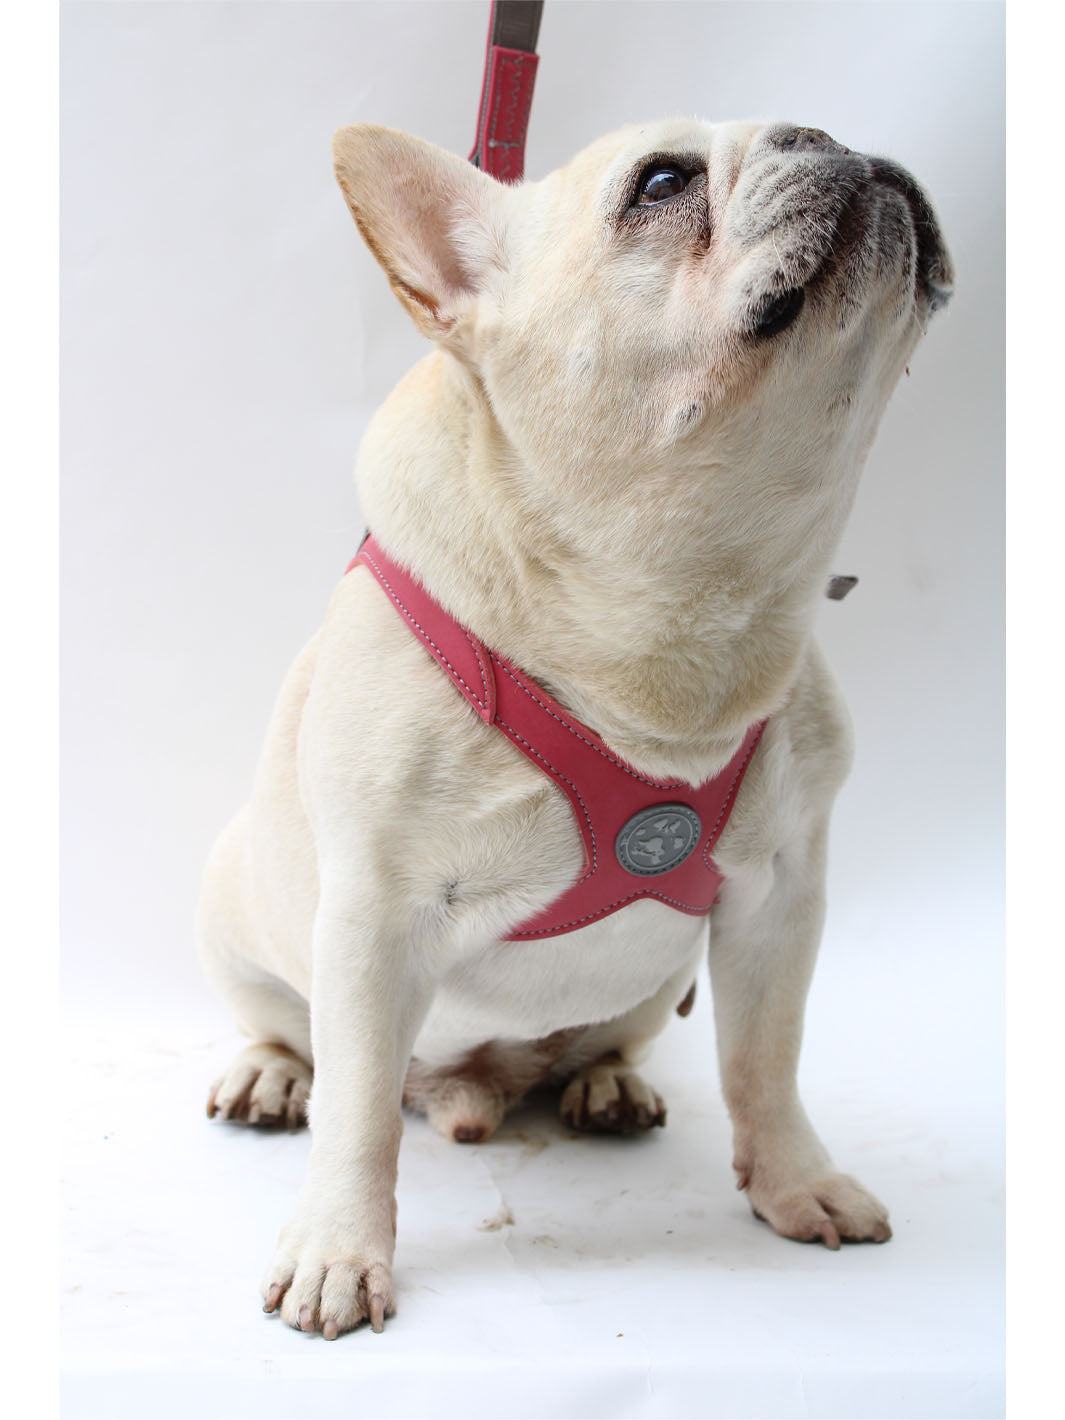 A cute cream french bulldog eats a treat on the photoset while wearing a pink MAGNUS Canis dog harness.